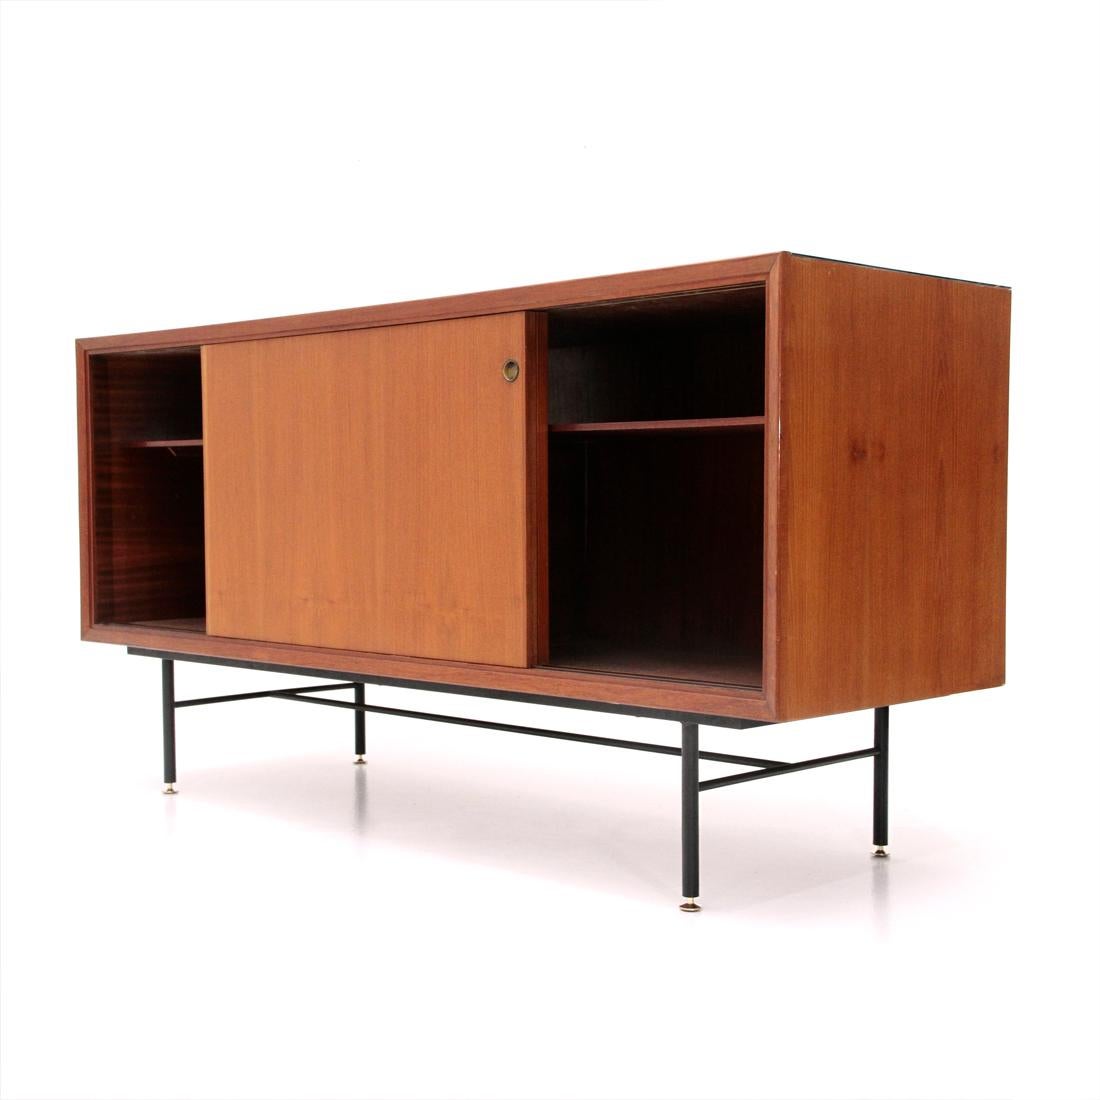 Mid-20th Century Italian Midcentury Sideboard with Black Glass Top, 1960s